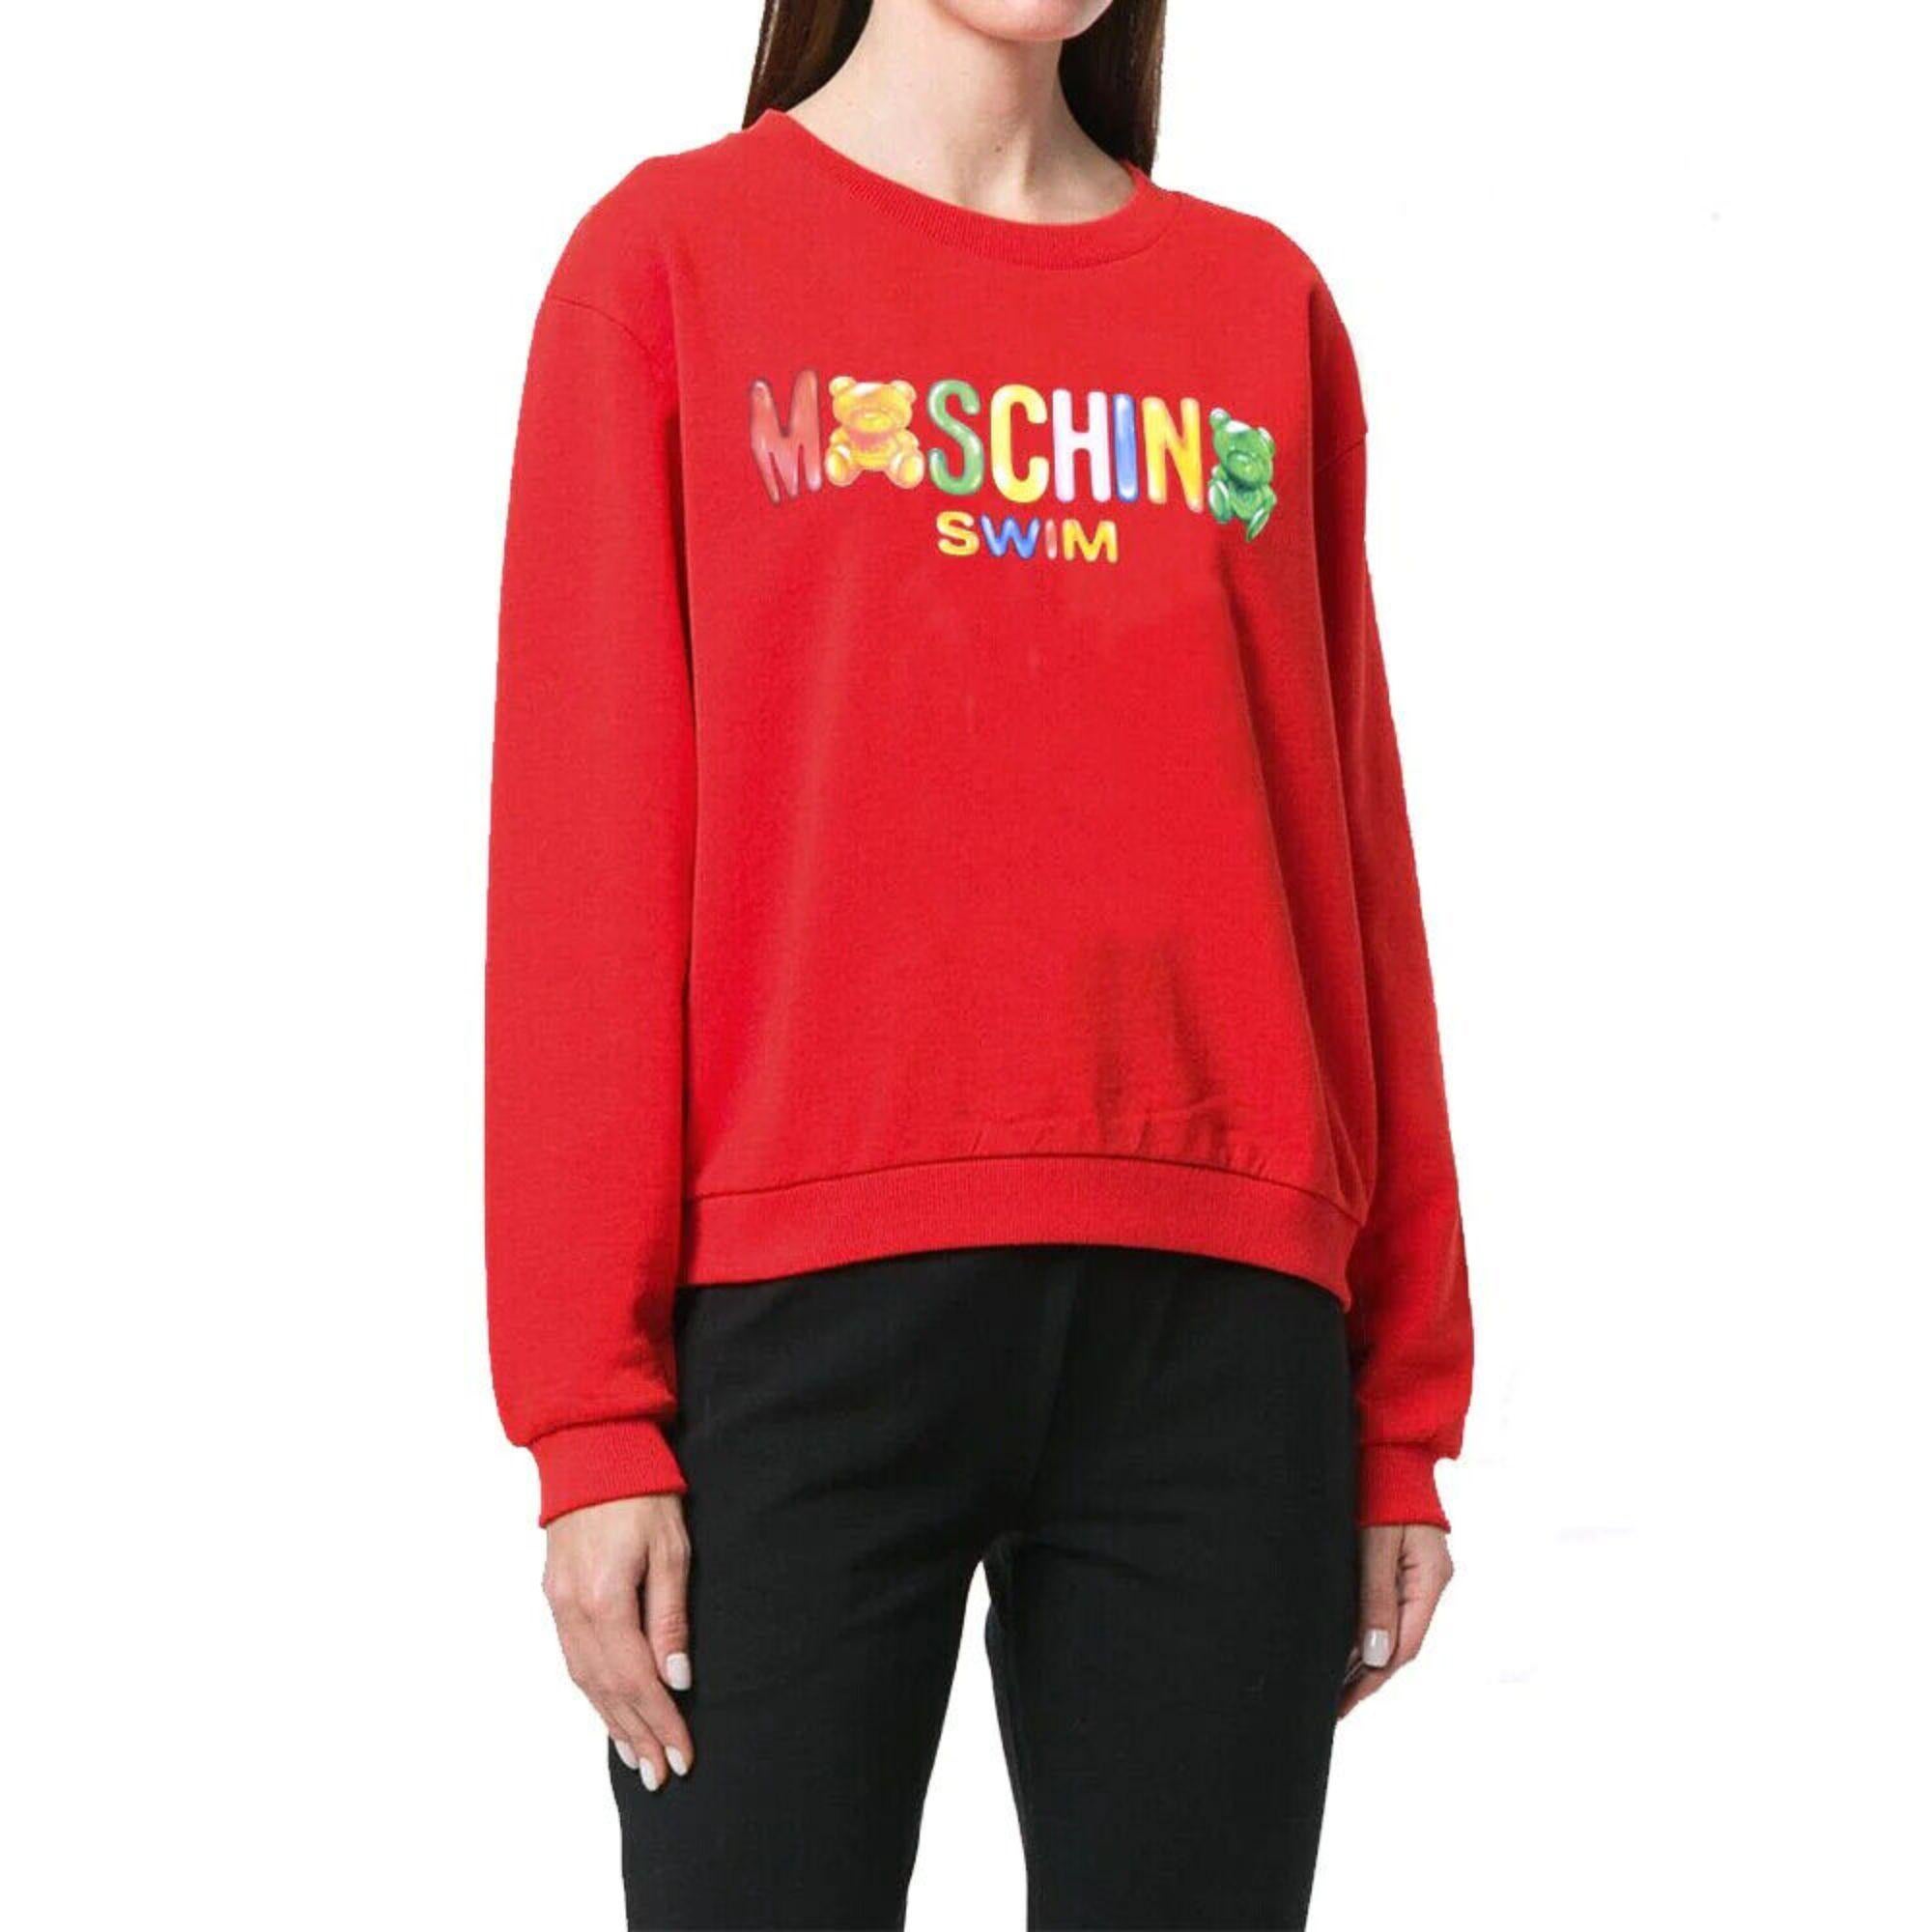 SS19 Moschino Swim Jeremy Scott Swim Jelly Gummy Teddy Bear Red Sweatshirt Candy

Additional Information:
Material: 100% Cotton
Color: Red
Size: S / US XS
Style: Pullover
Pattern: Logo, Gummy Bear
Dimensions: Shoulder to shoulder 18.5